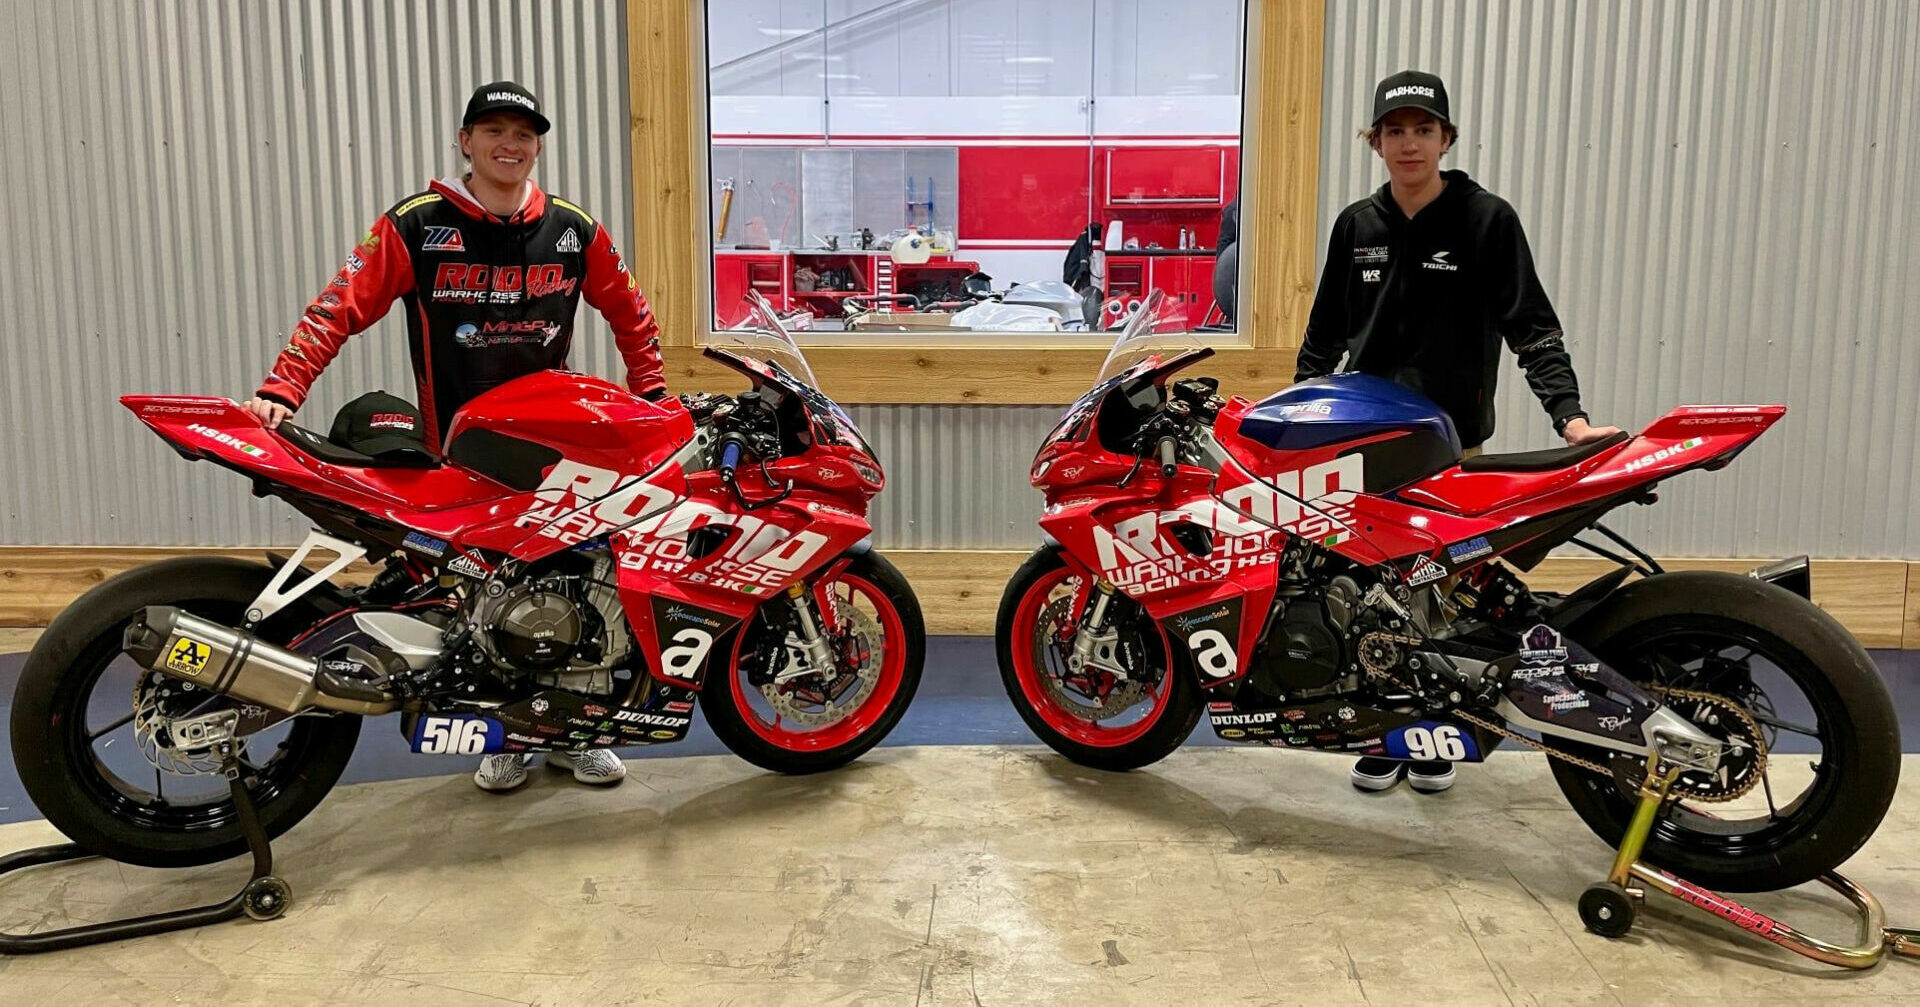 Anthony Mazziotto (left) and his teammate Gus Rodio (right). Photo courtesy Rodio Racing Warhorse HSBK Racing.